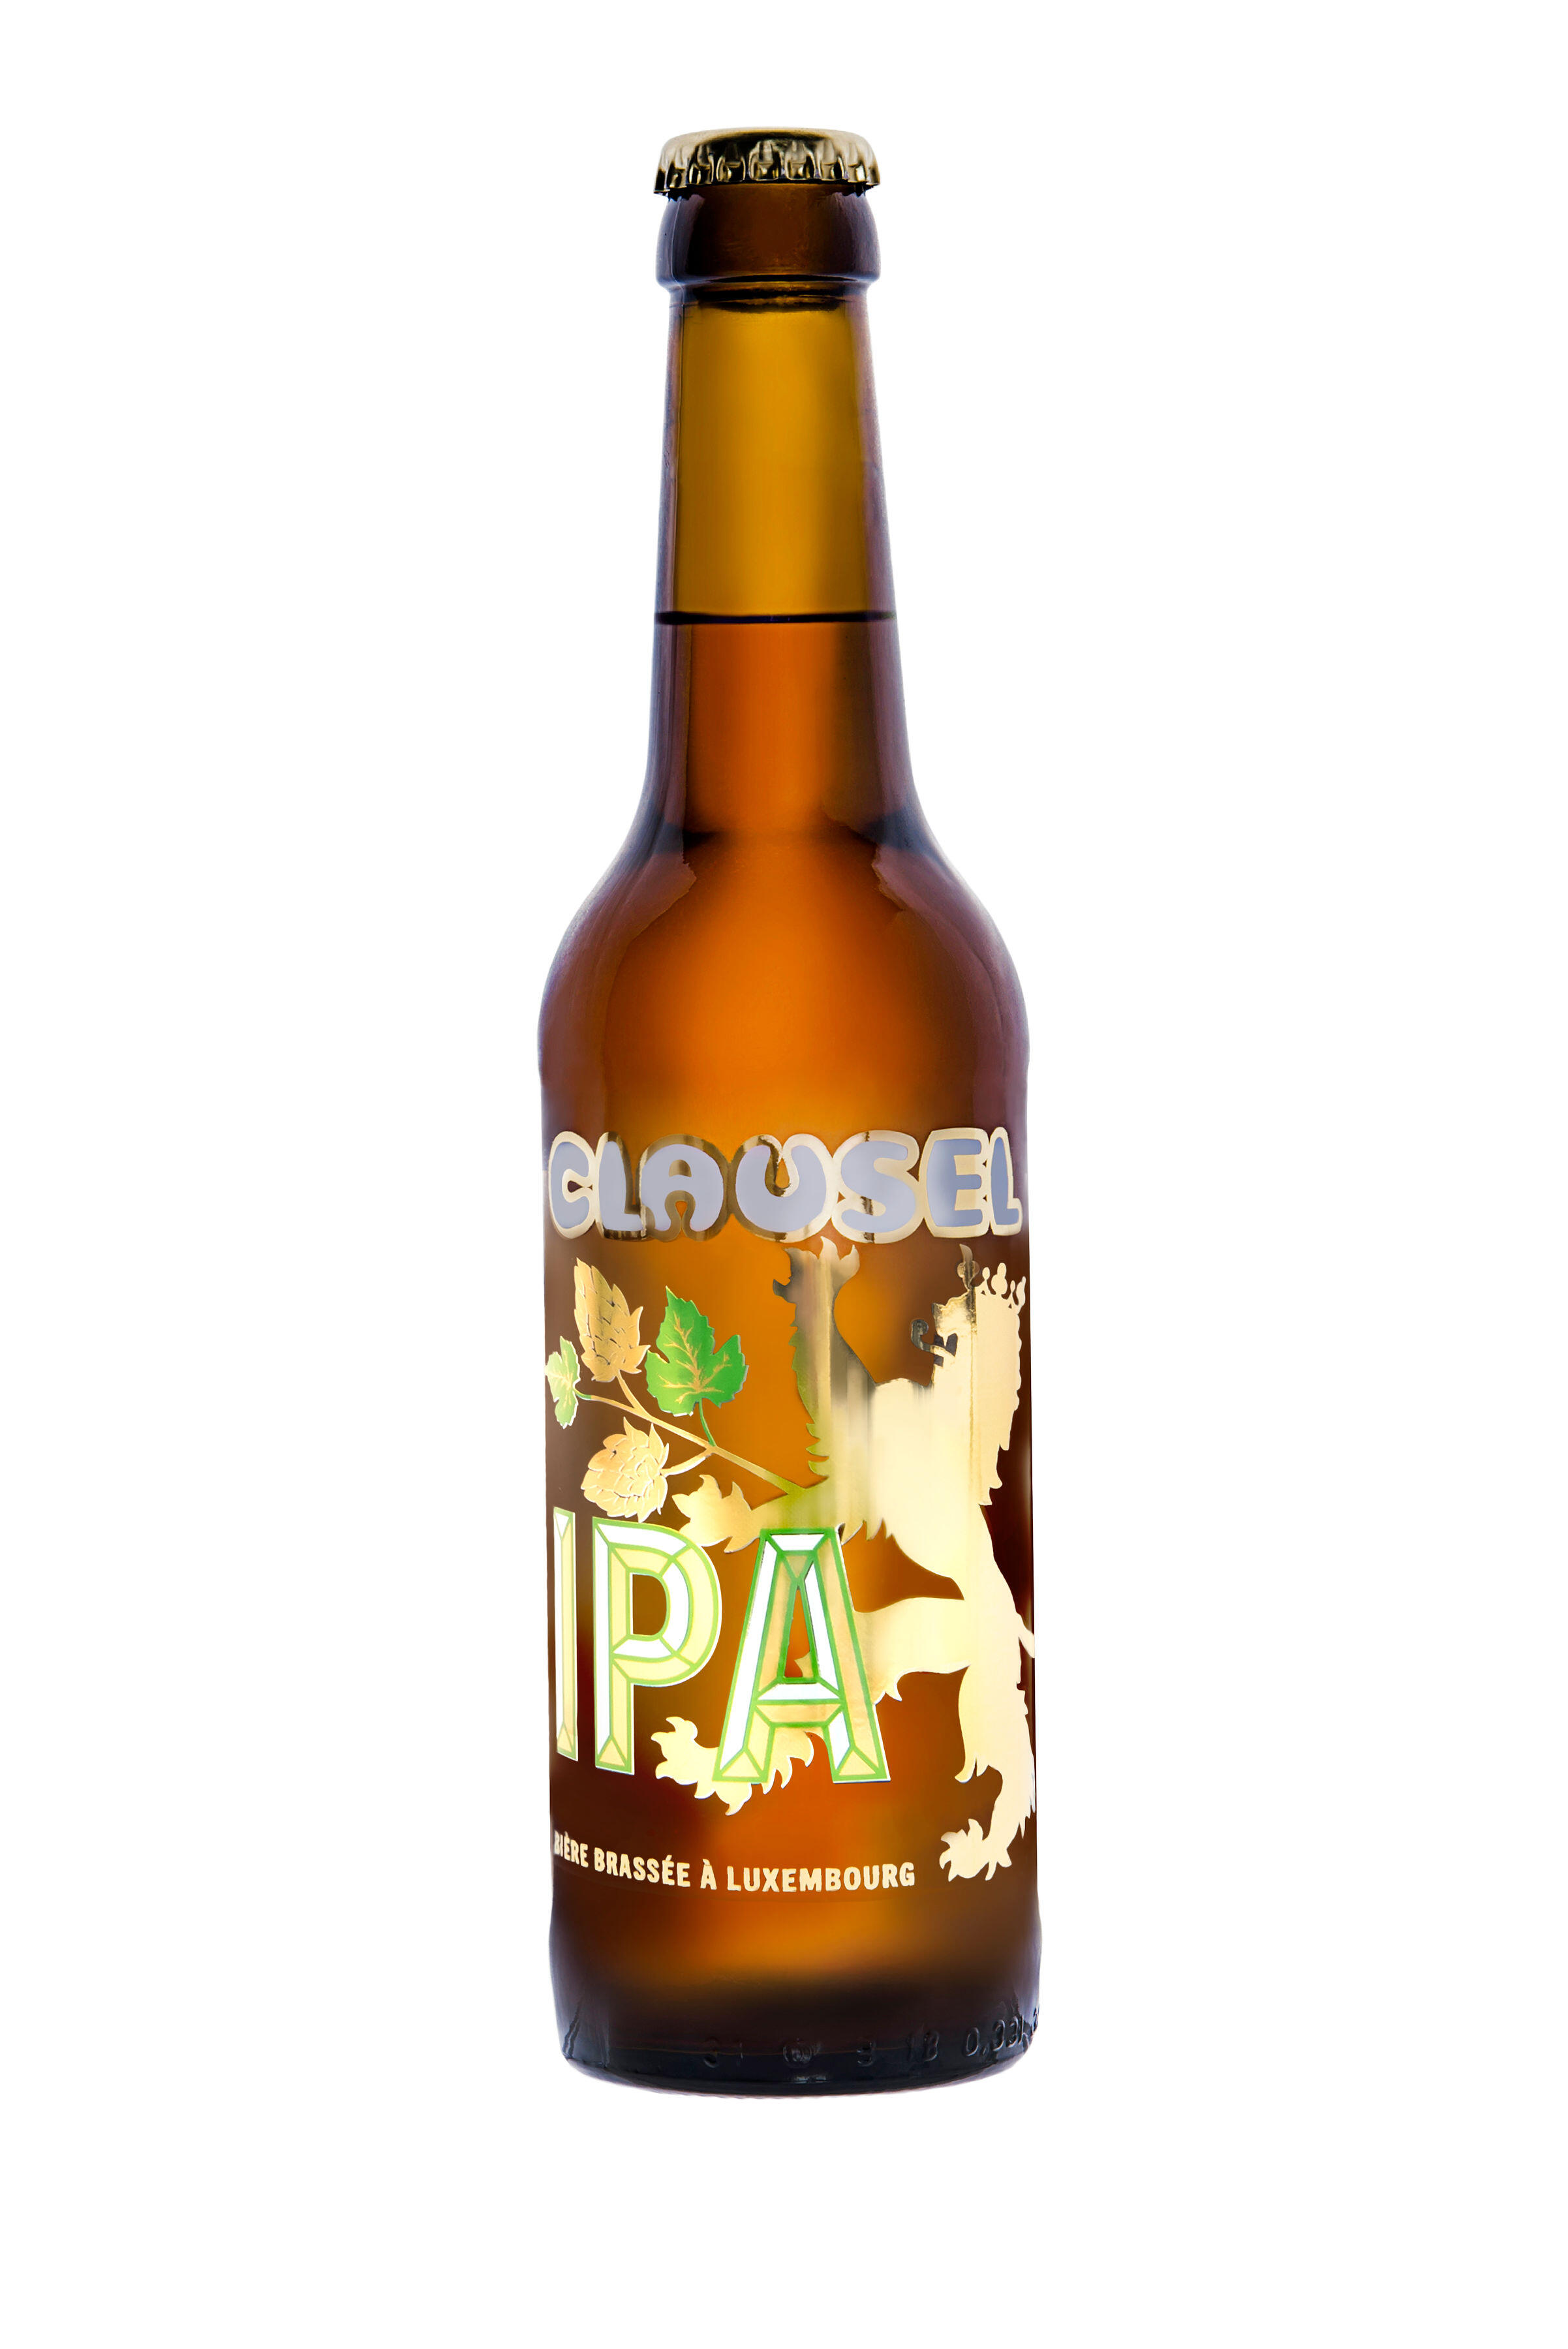 Clausel IPA 24-bottle 33cl carton (one-way packaging)